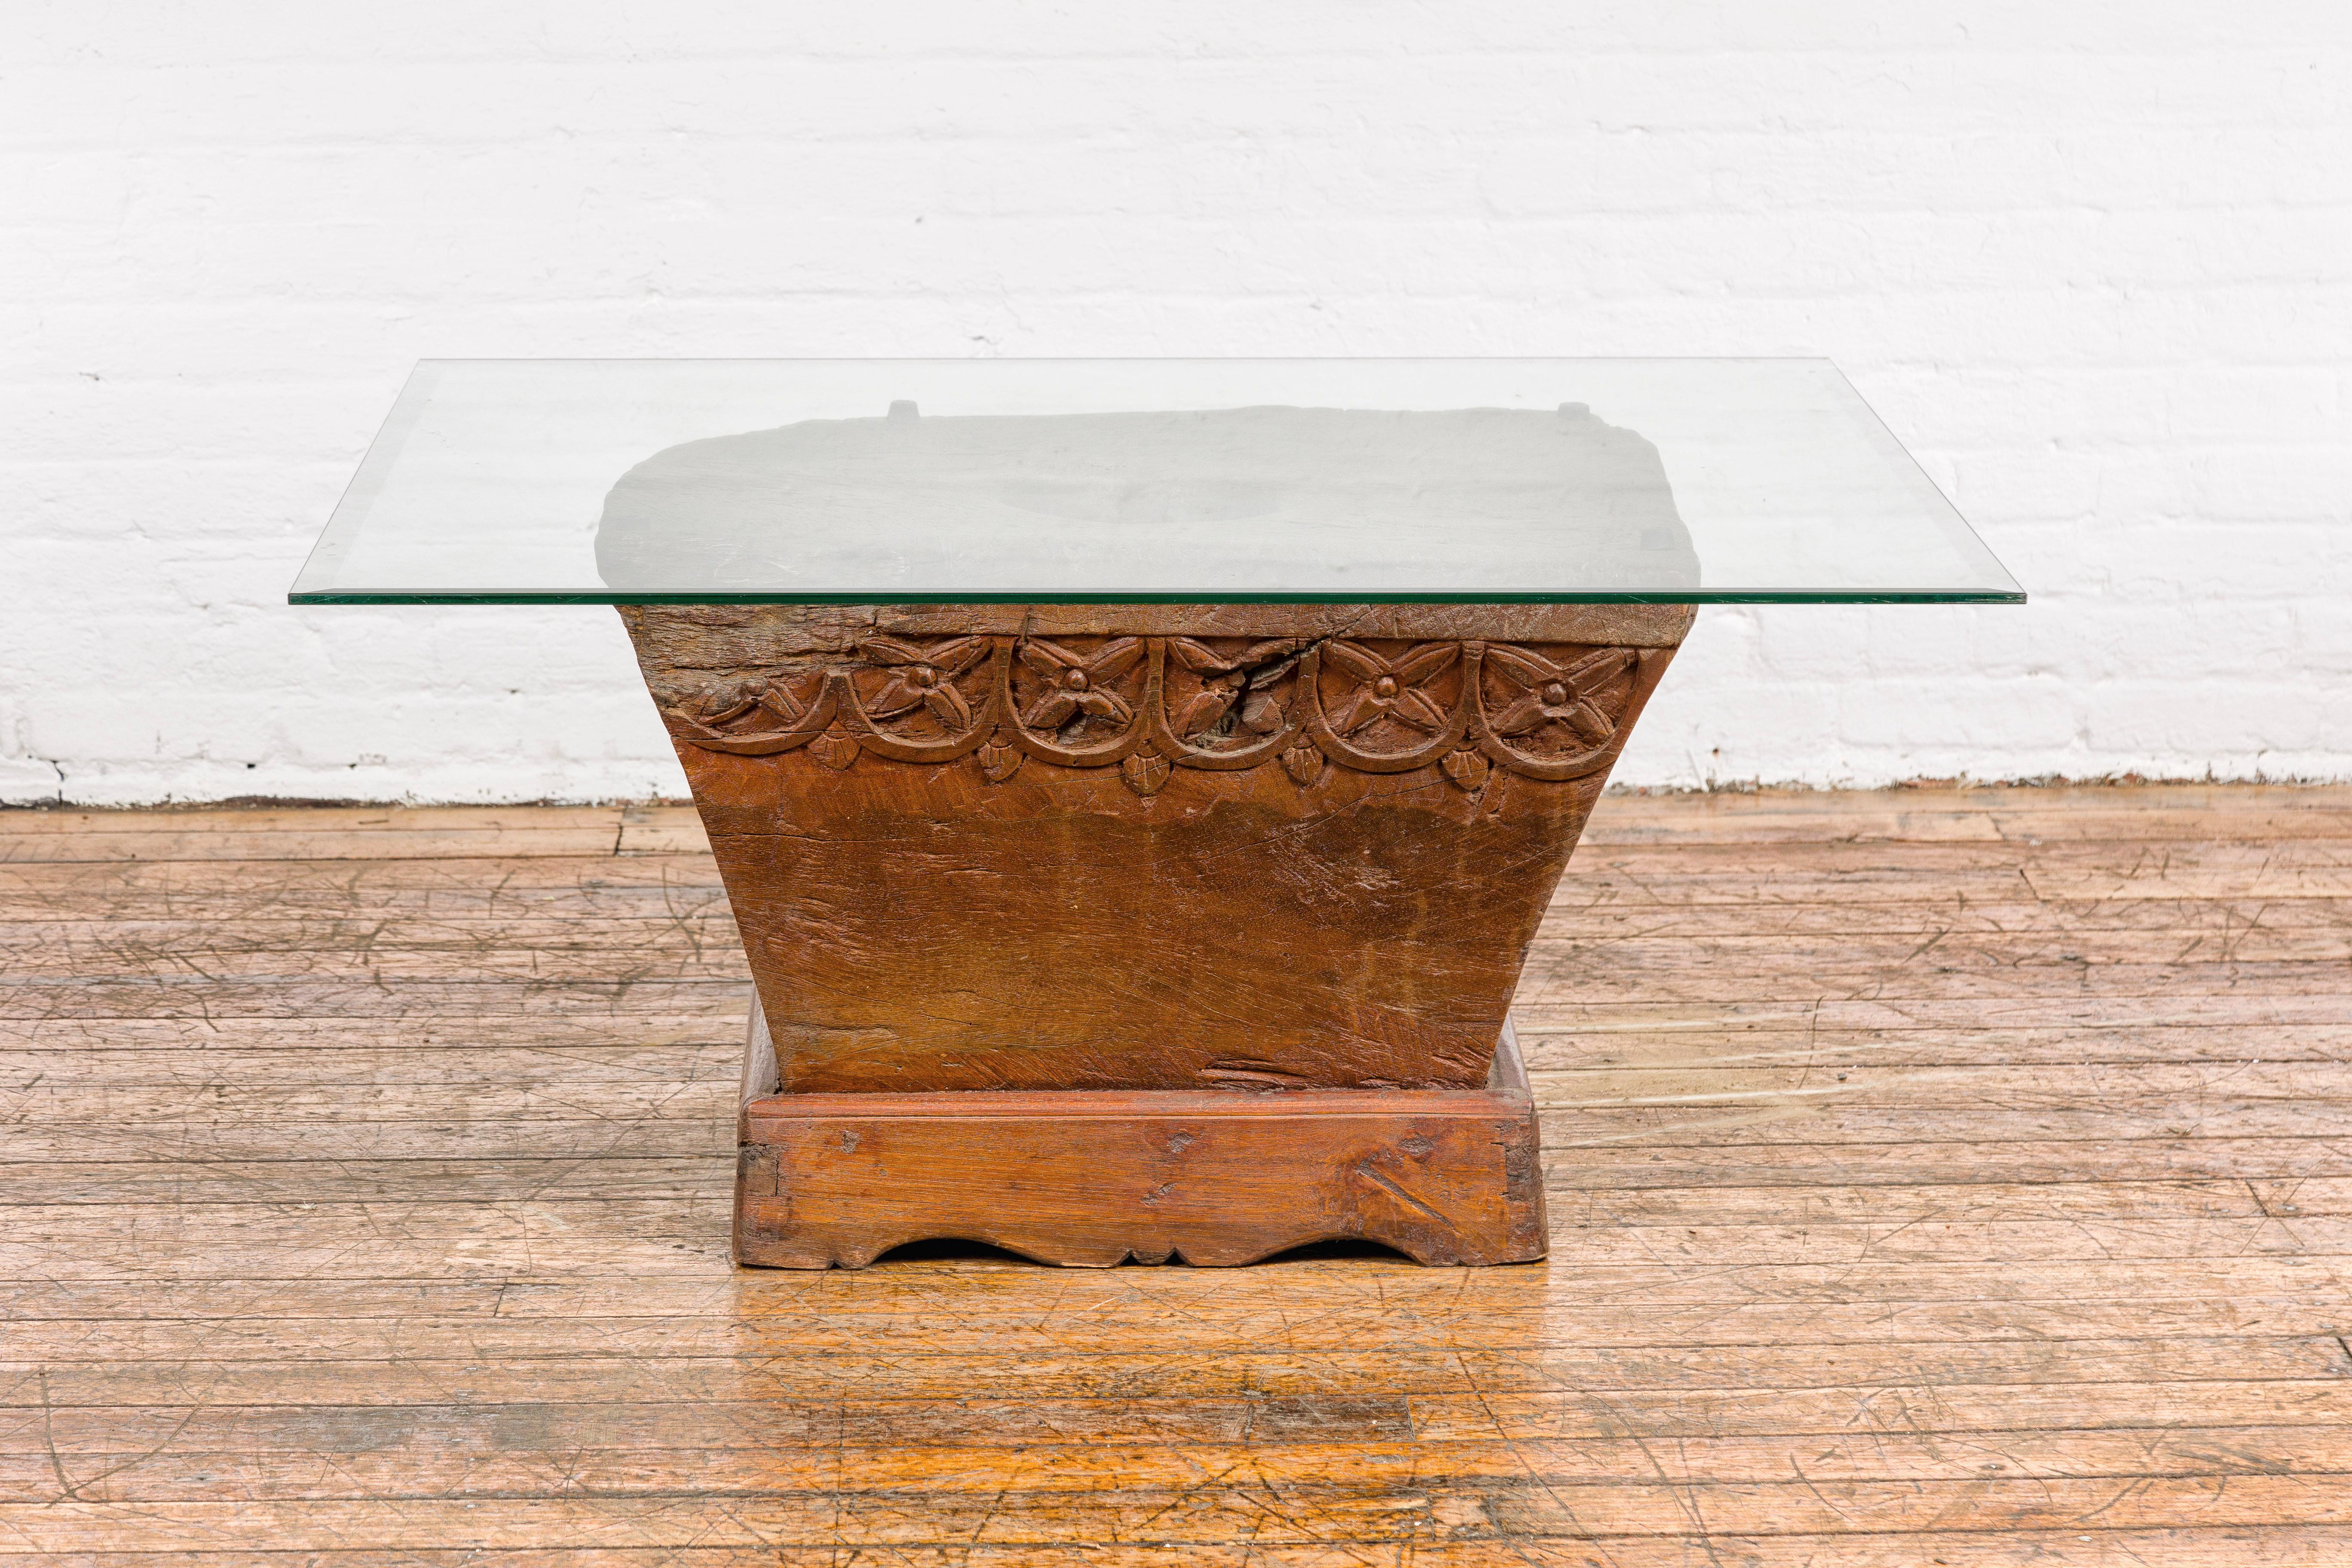 A Primitive teak wood mortar converted into a coffee table base, with floral carved accents, bracketed base and rustic character. Step into a world of rustic charm and unique design with this Primitive teak wood mortar, ingeniously repurposed into a